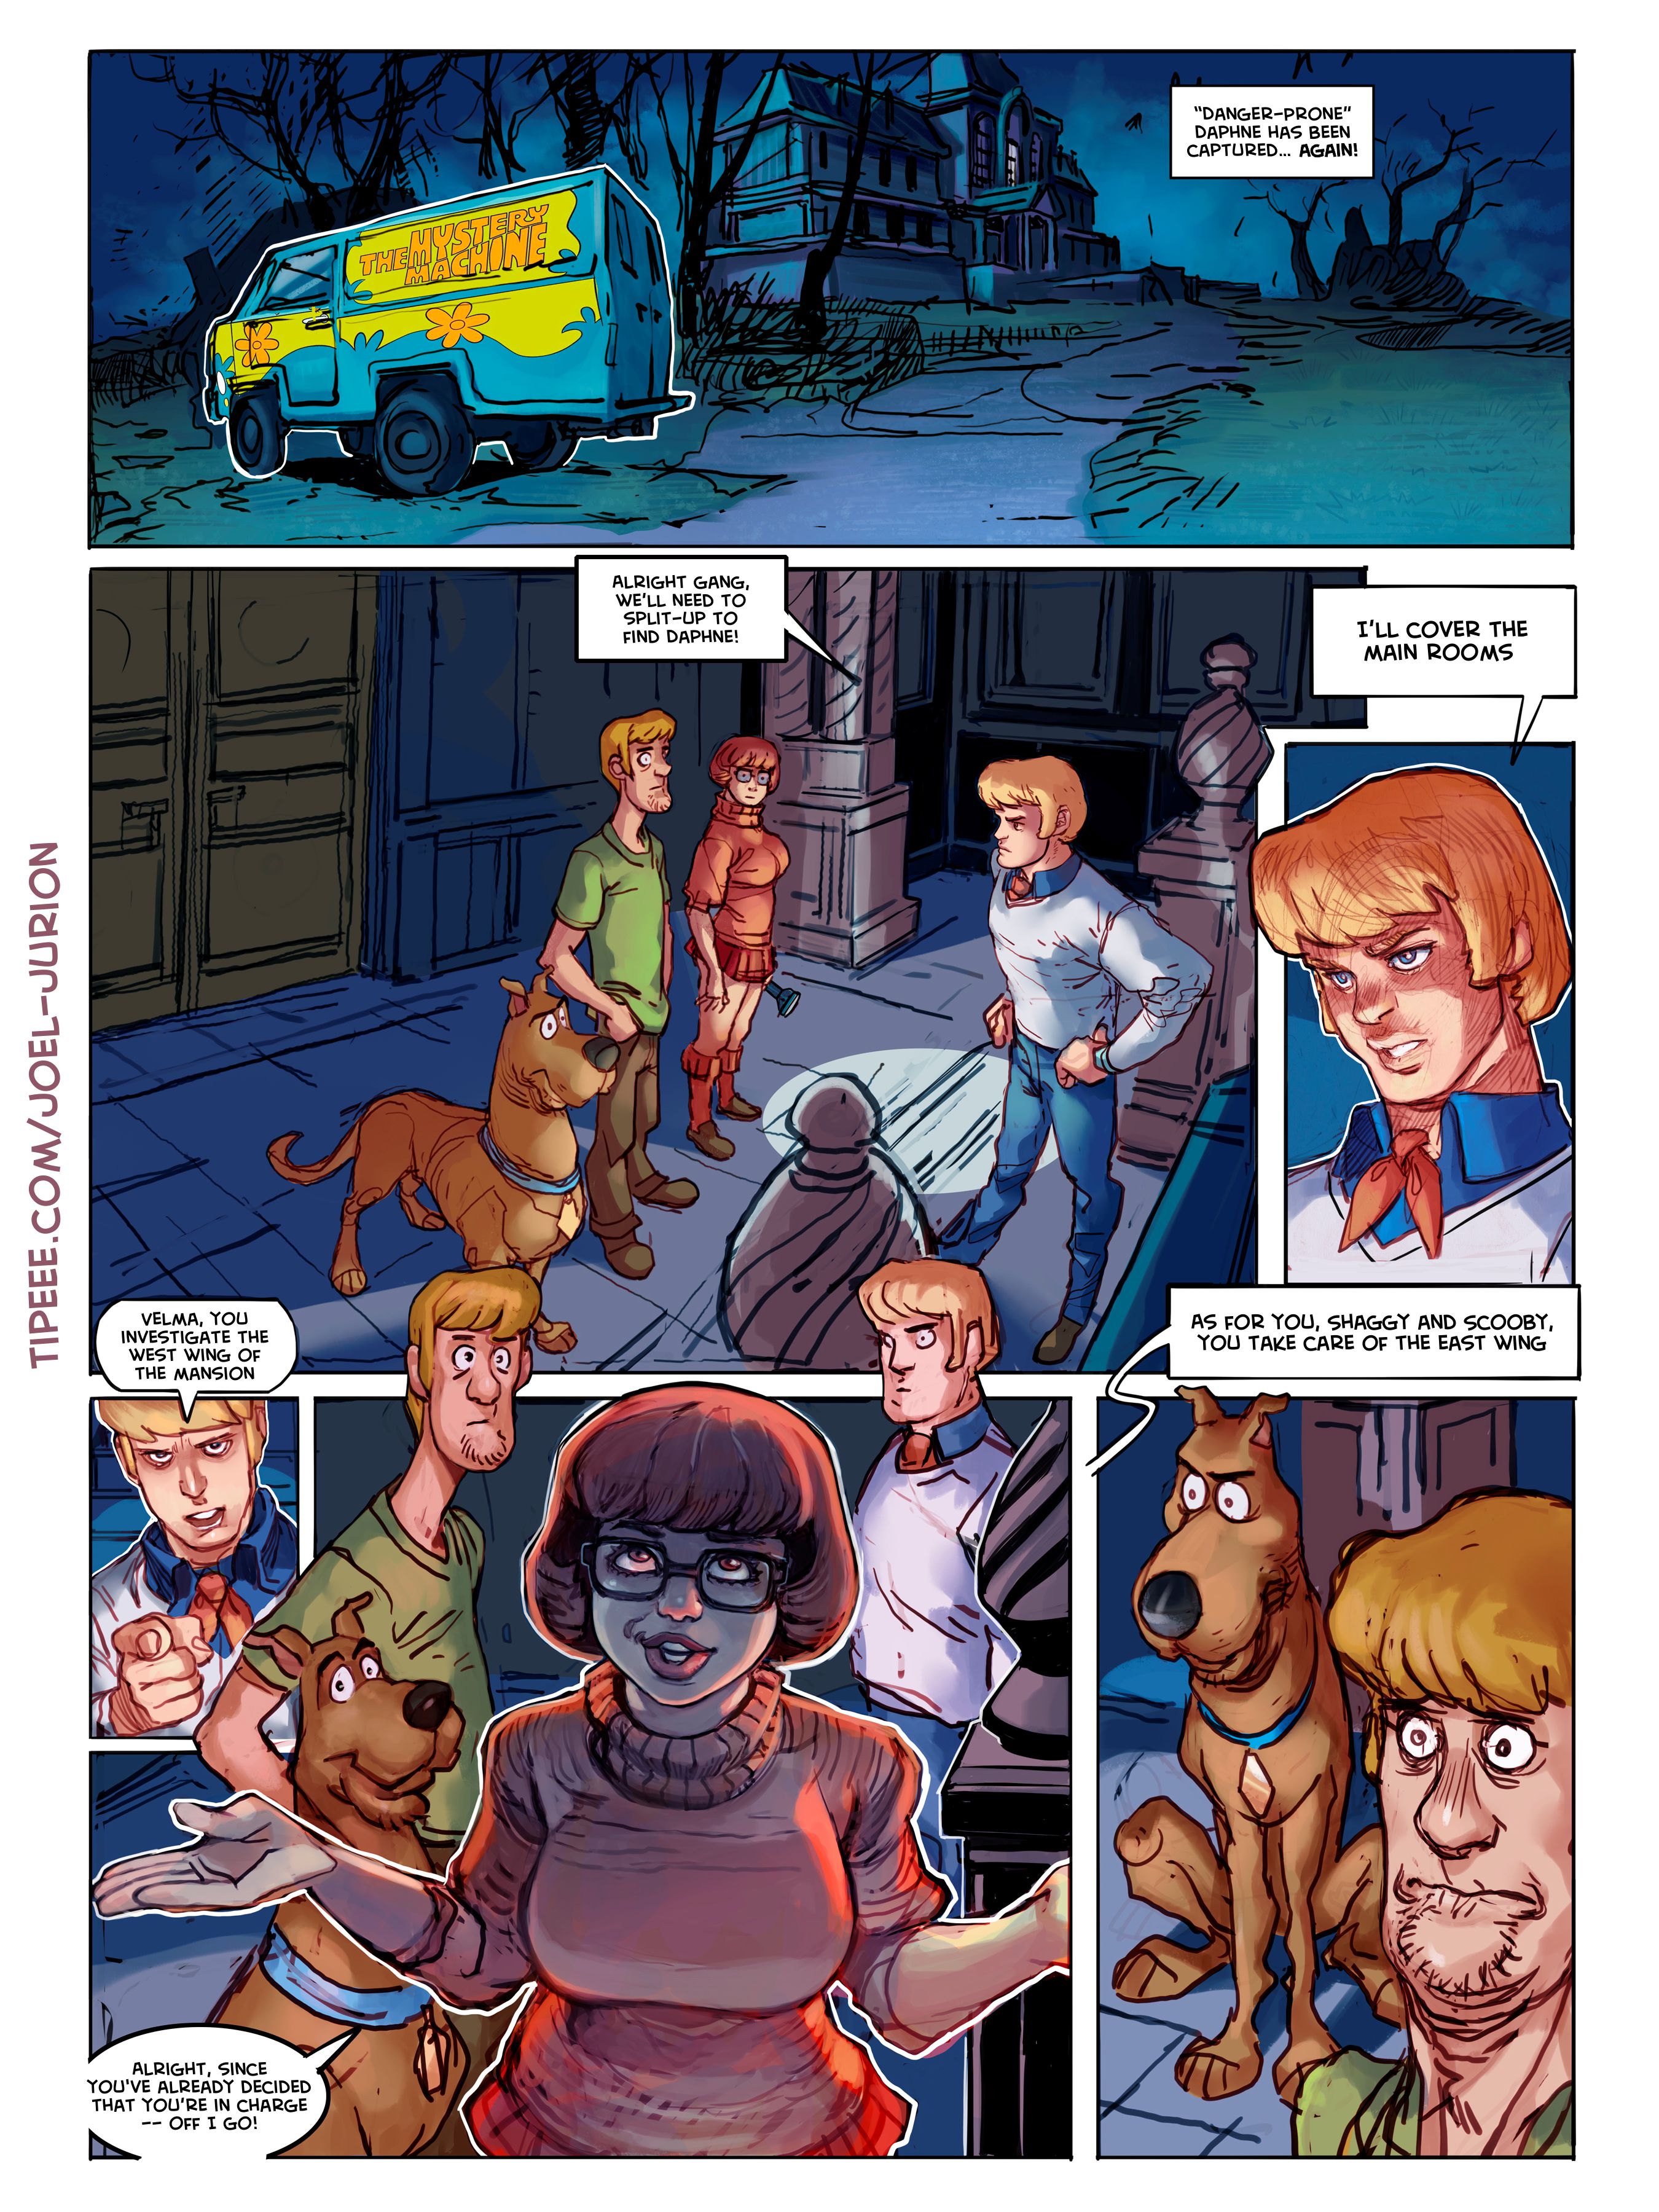 Free scooby doo porn comic page1